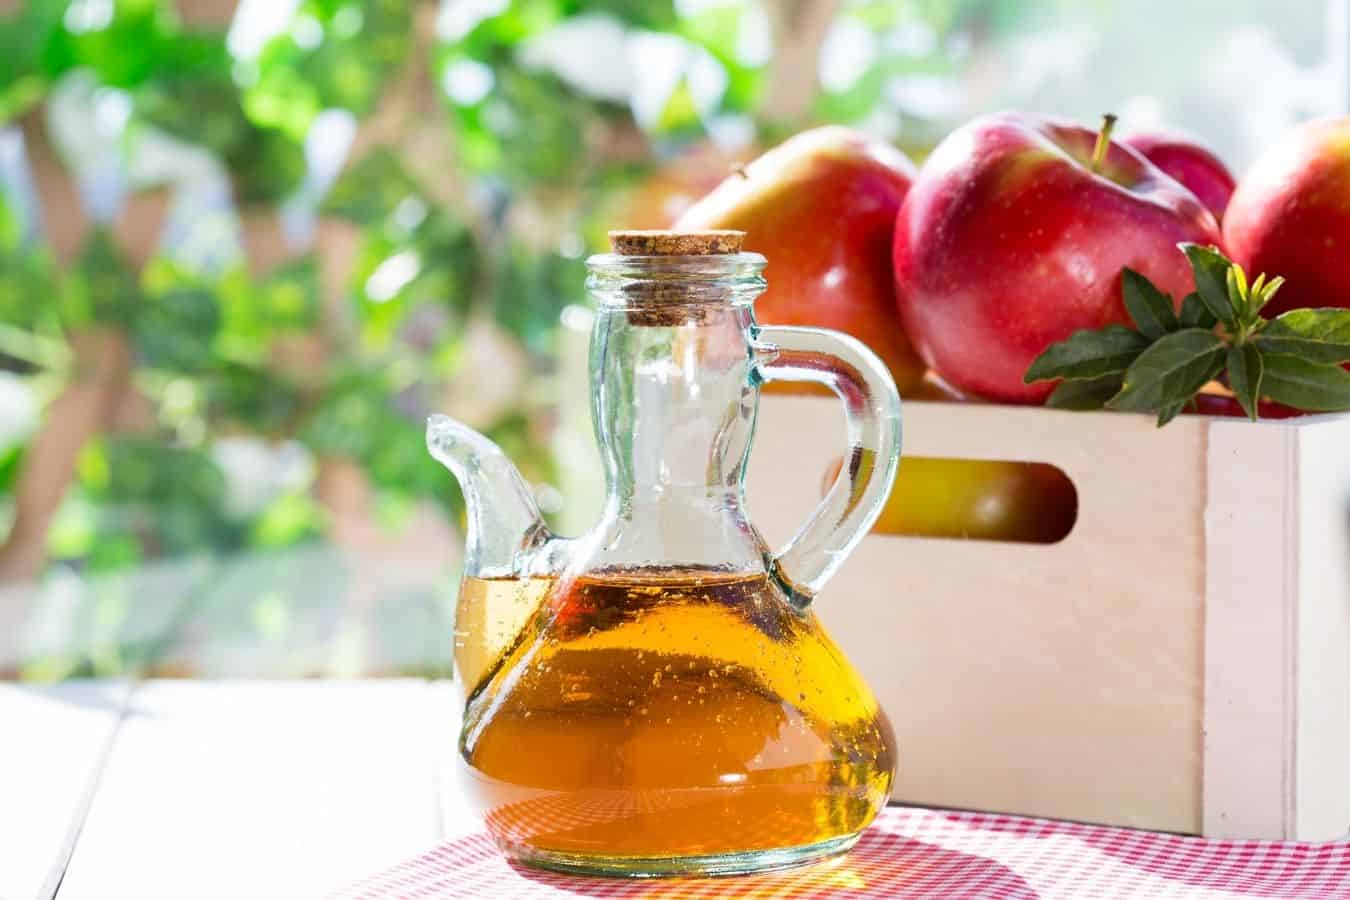 How To Use Apple Cider Vinegar For Hair